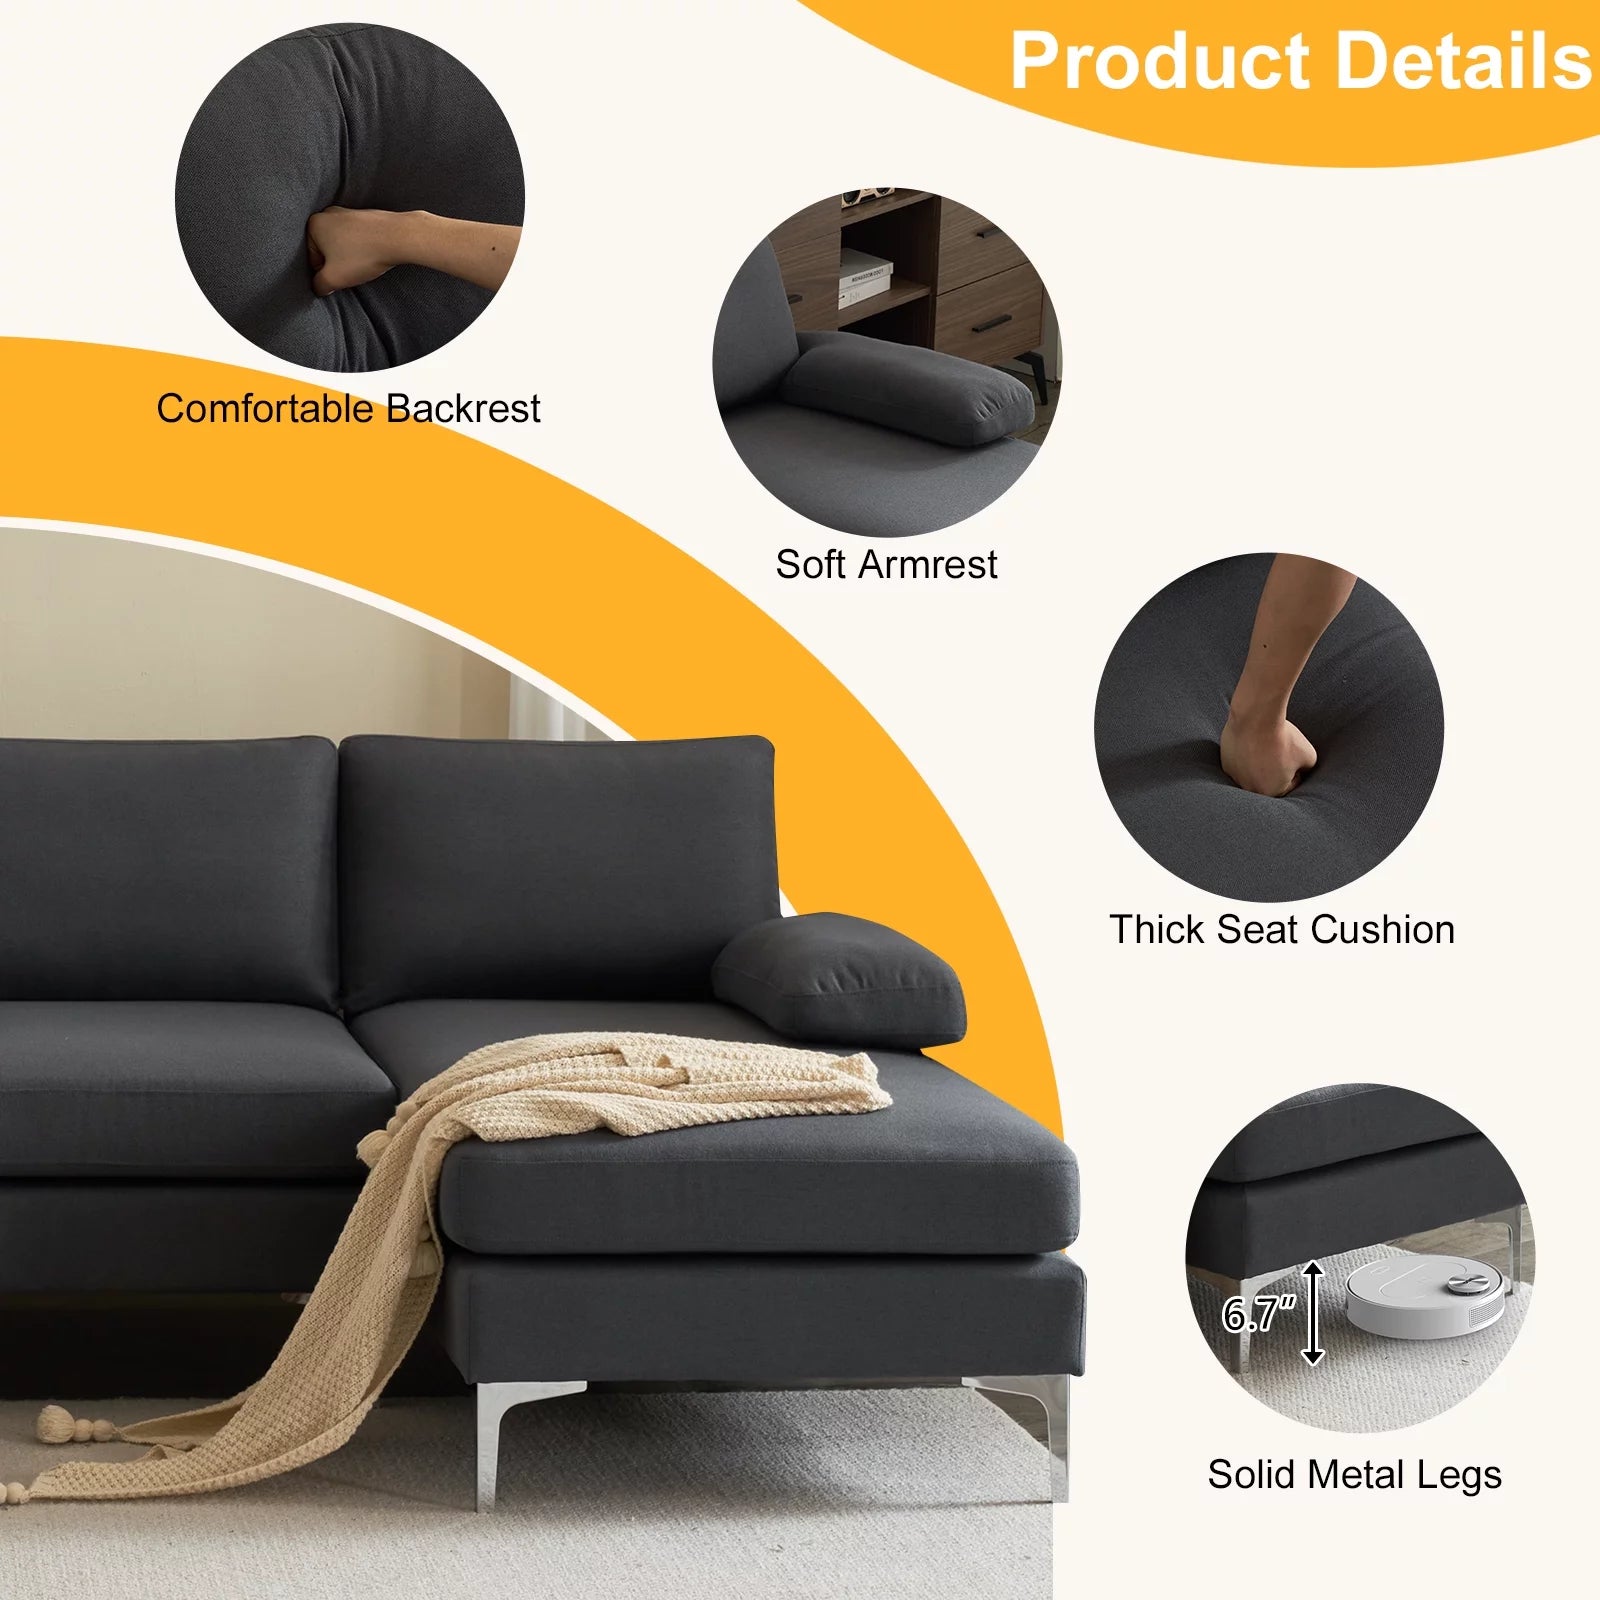 Sectional Sofa, U-Shape Convertible Couch Set with Soft Linen Fabric, Lounge Sleeper with Chaise for Living Room 4 Seat Dark Gray - Design By Technique